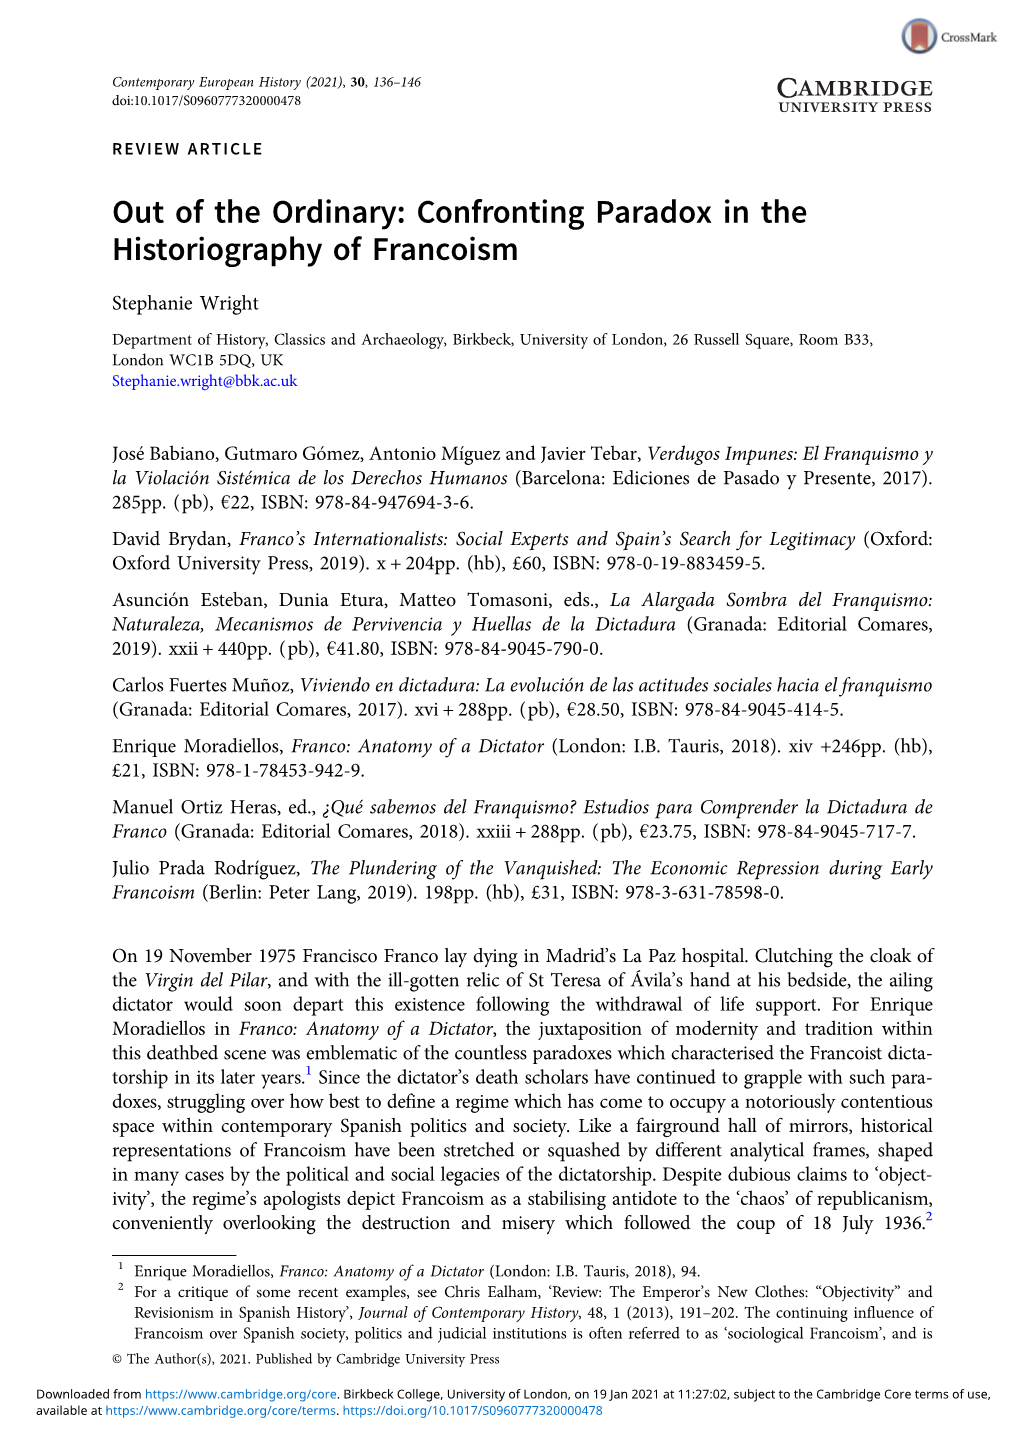 Confronting Paradox in the Historiography of Francoism